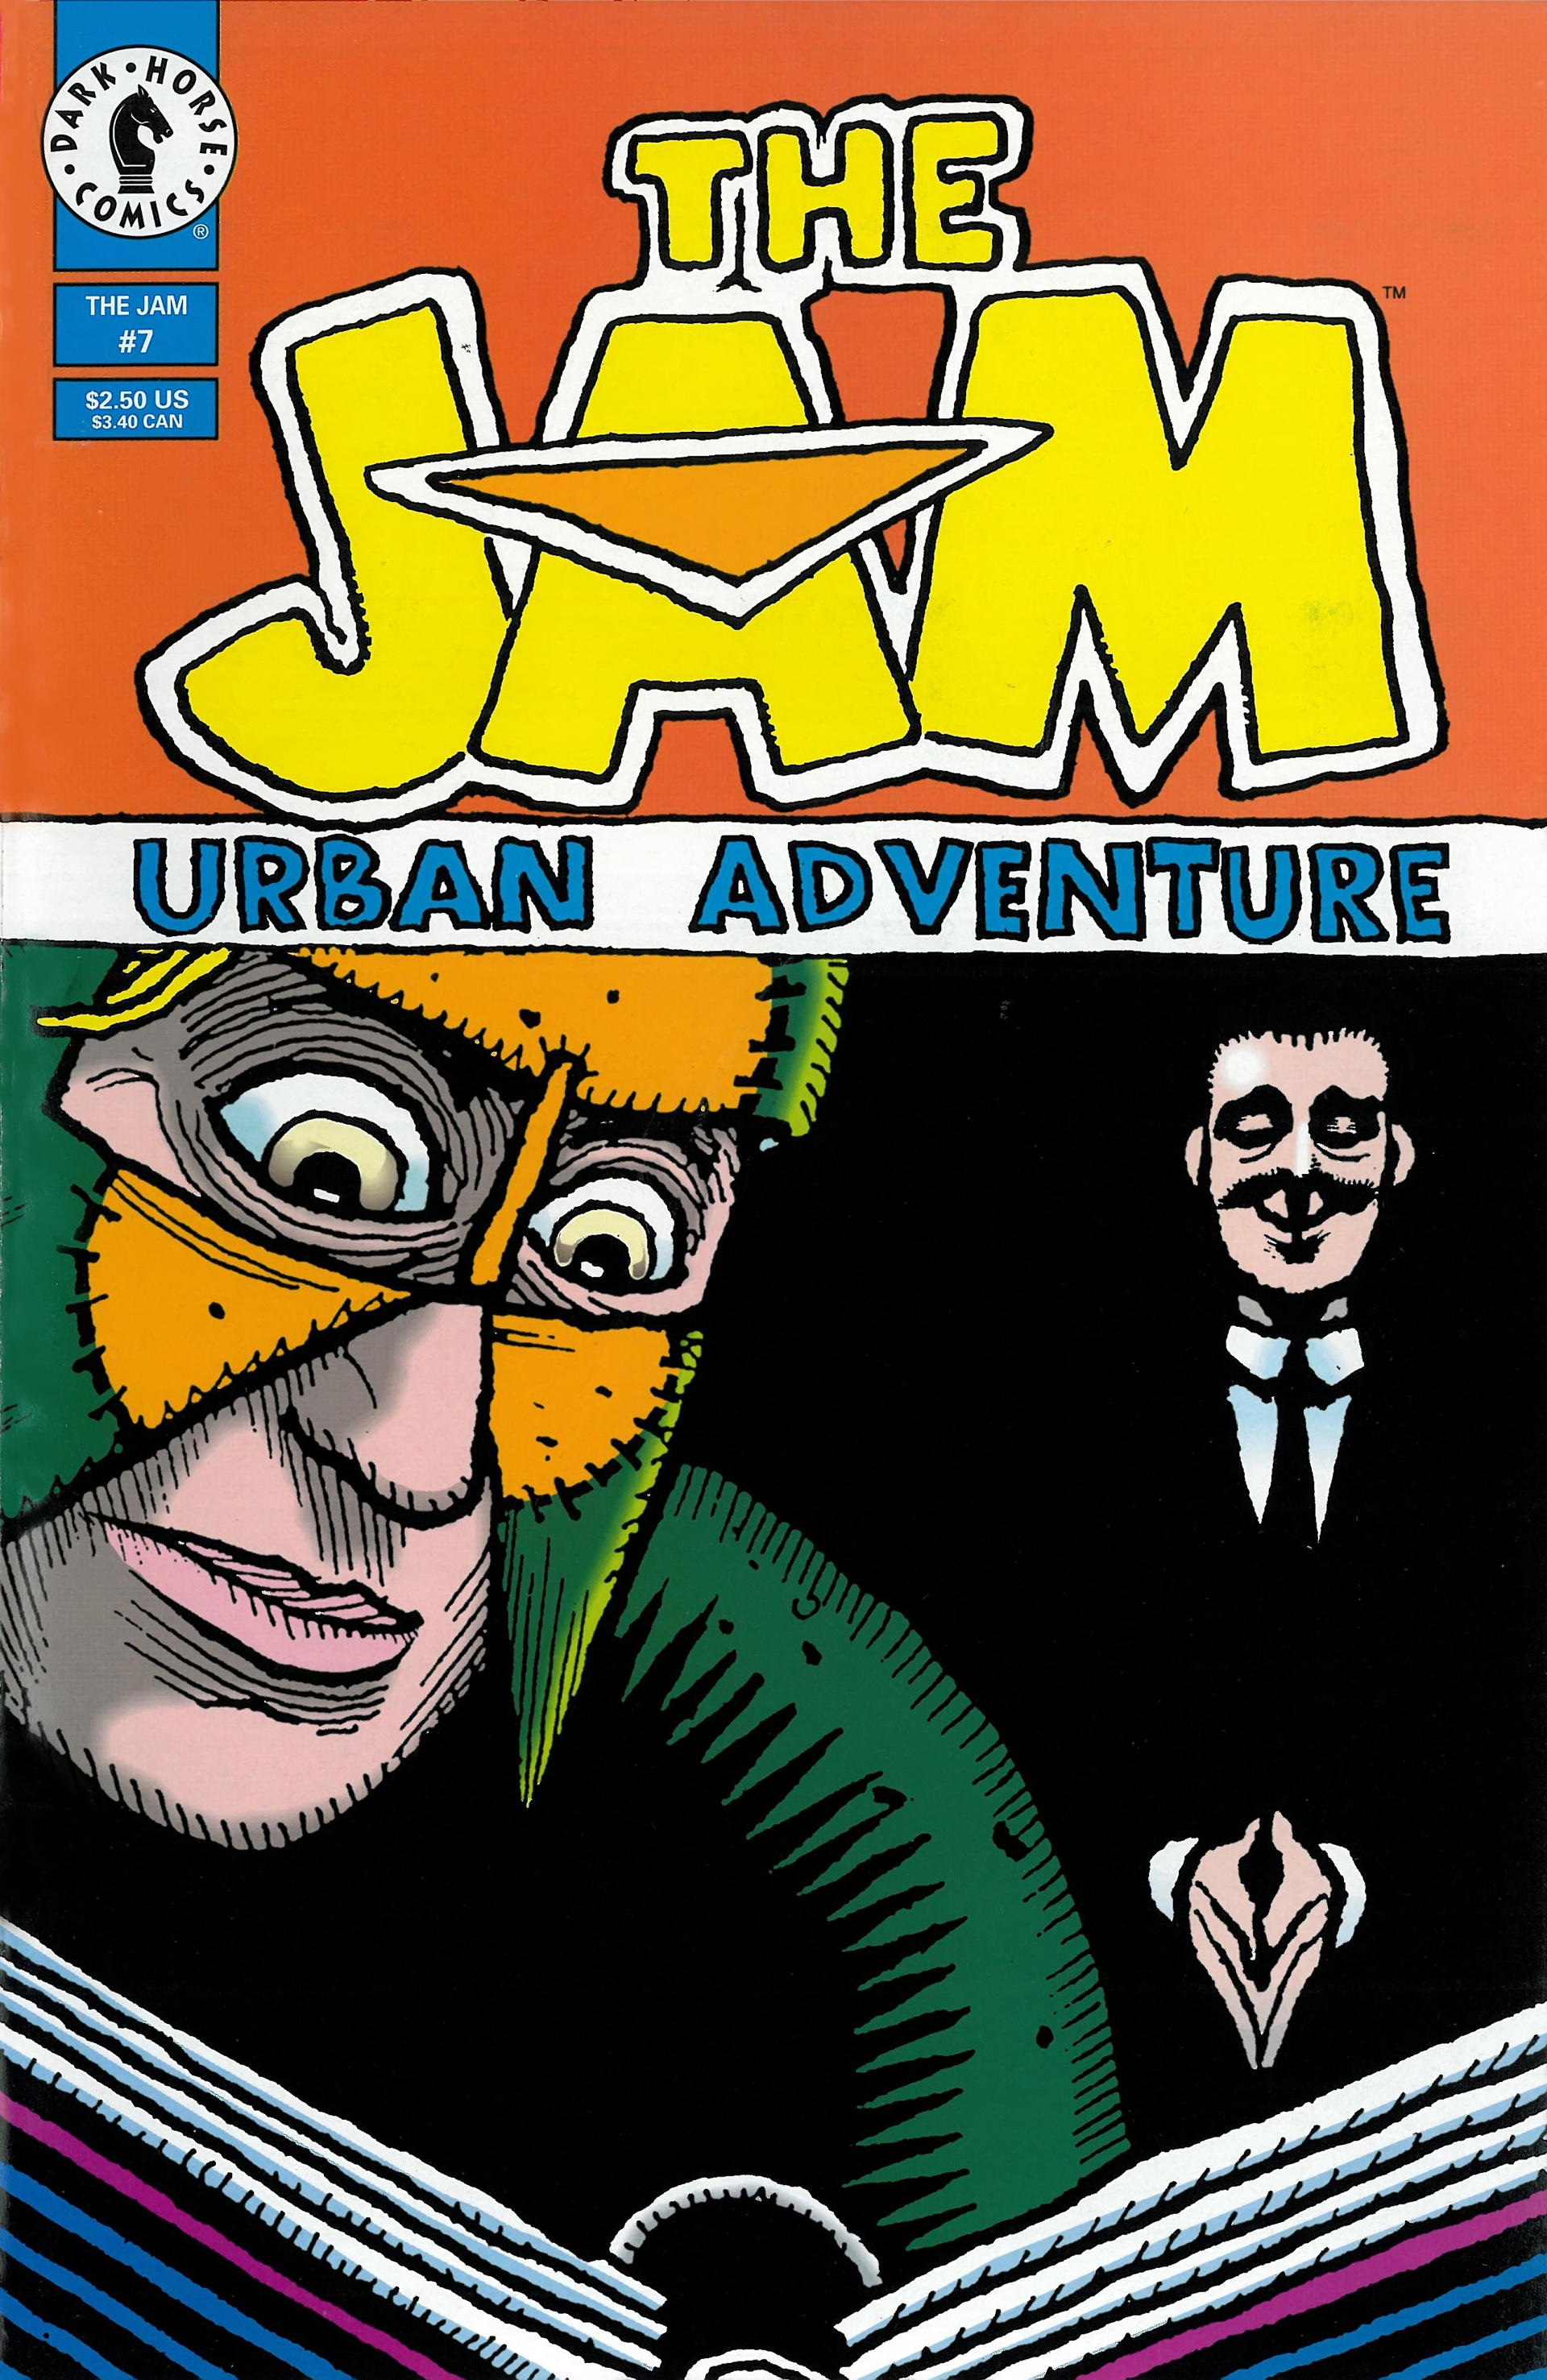 Read online The Jam comic -  Issue #7 - 1